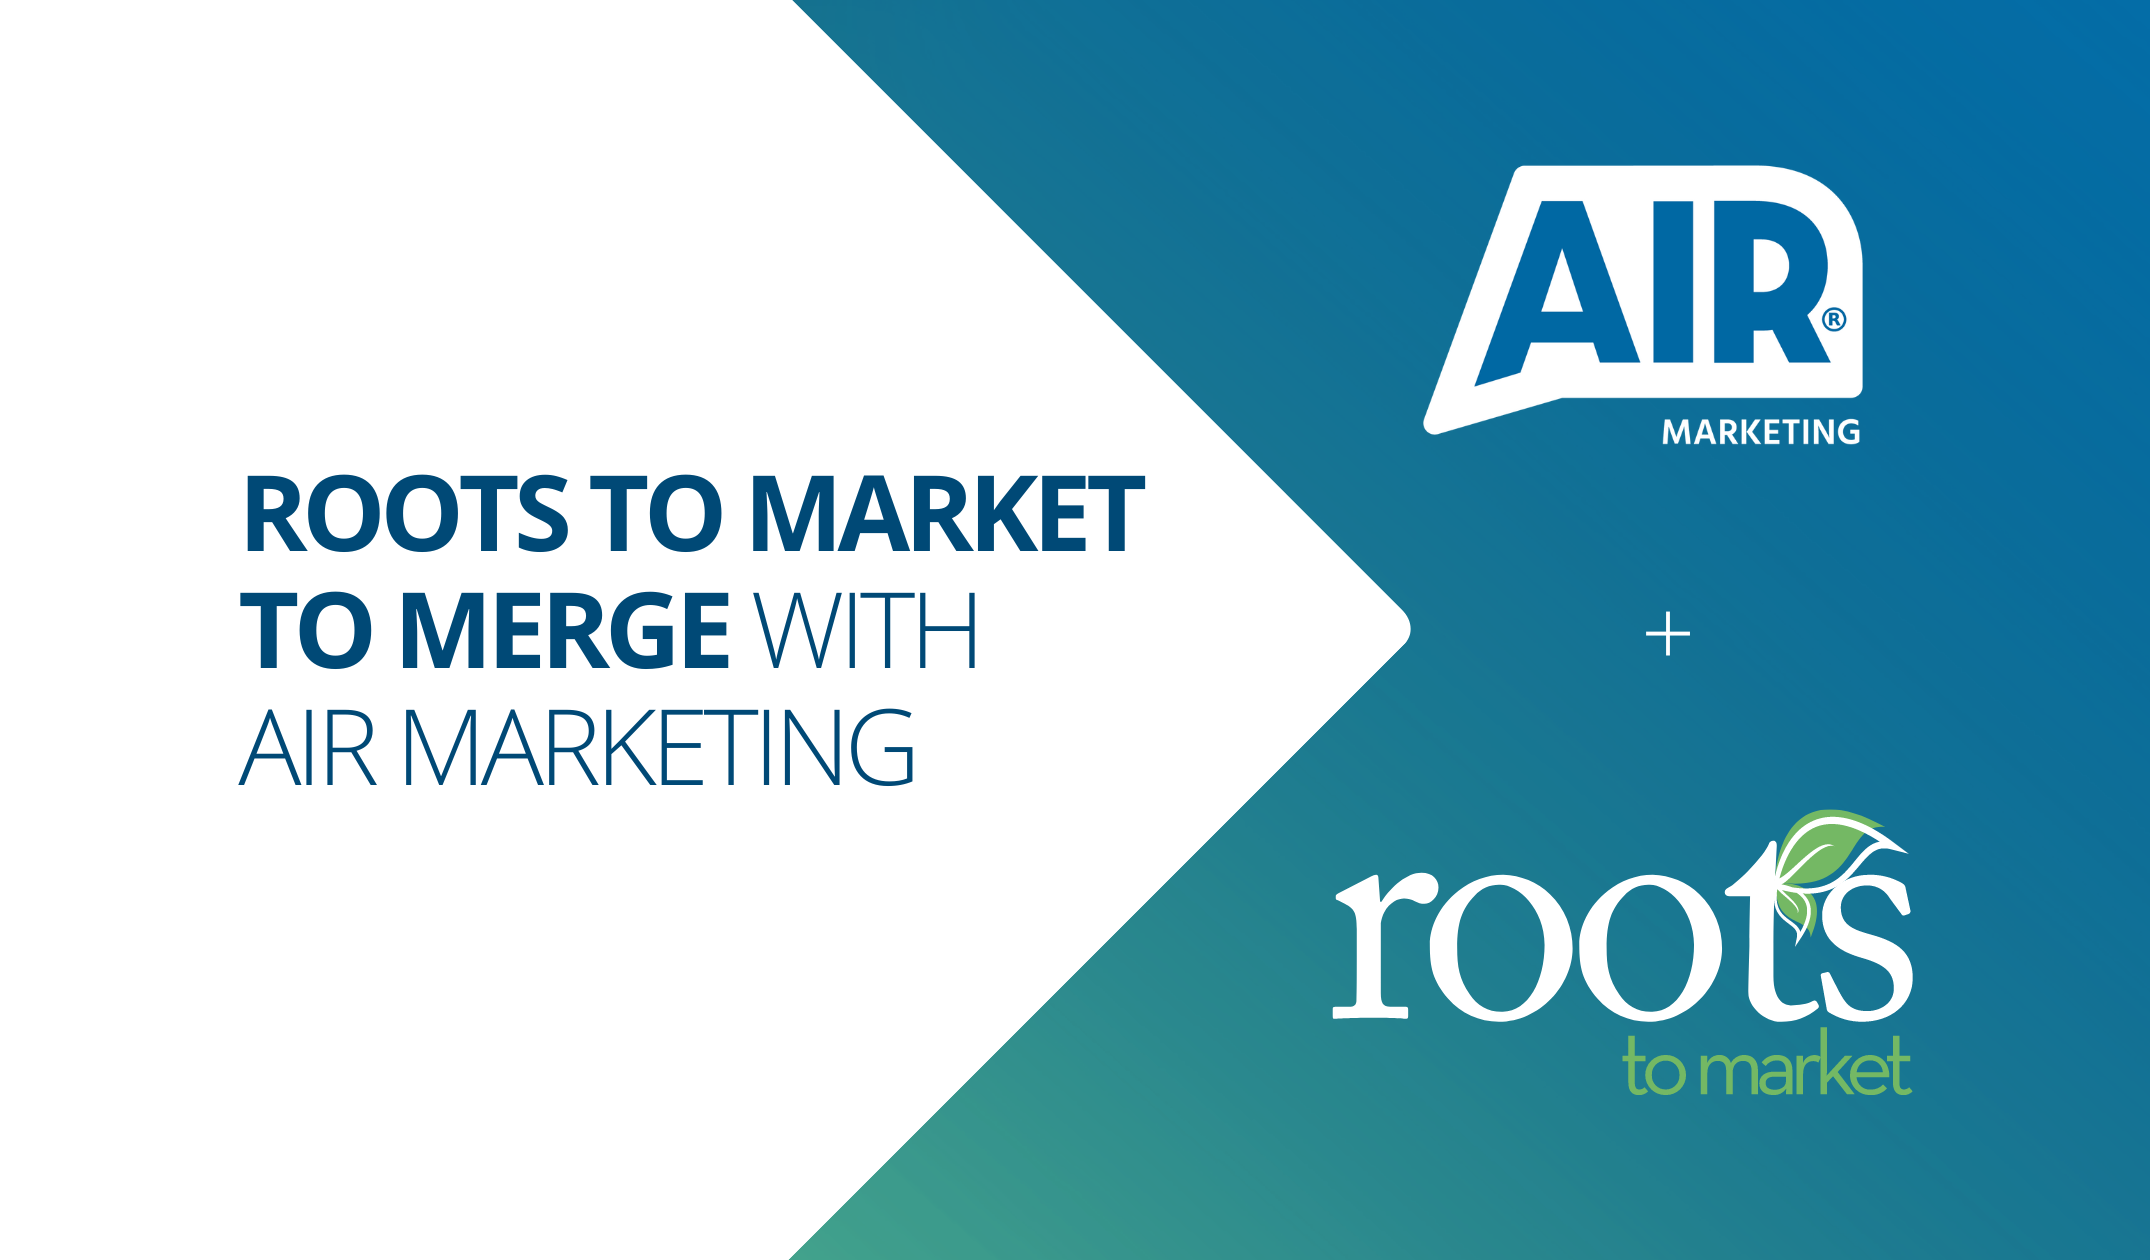 Roots to Market Are Merging With Air Marketing!